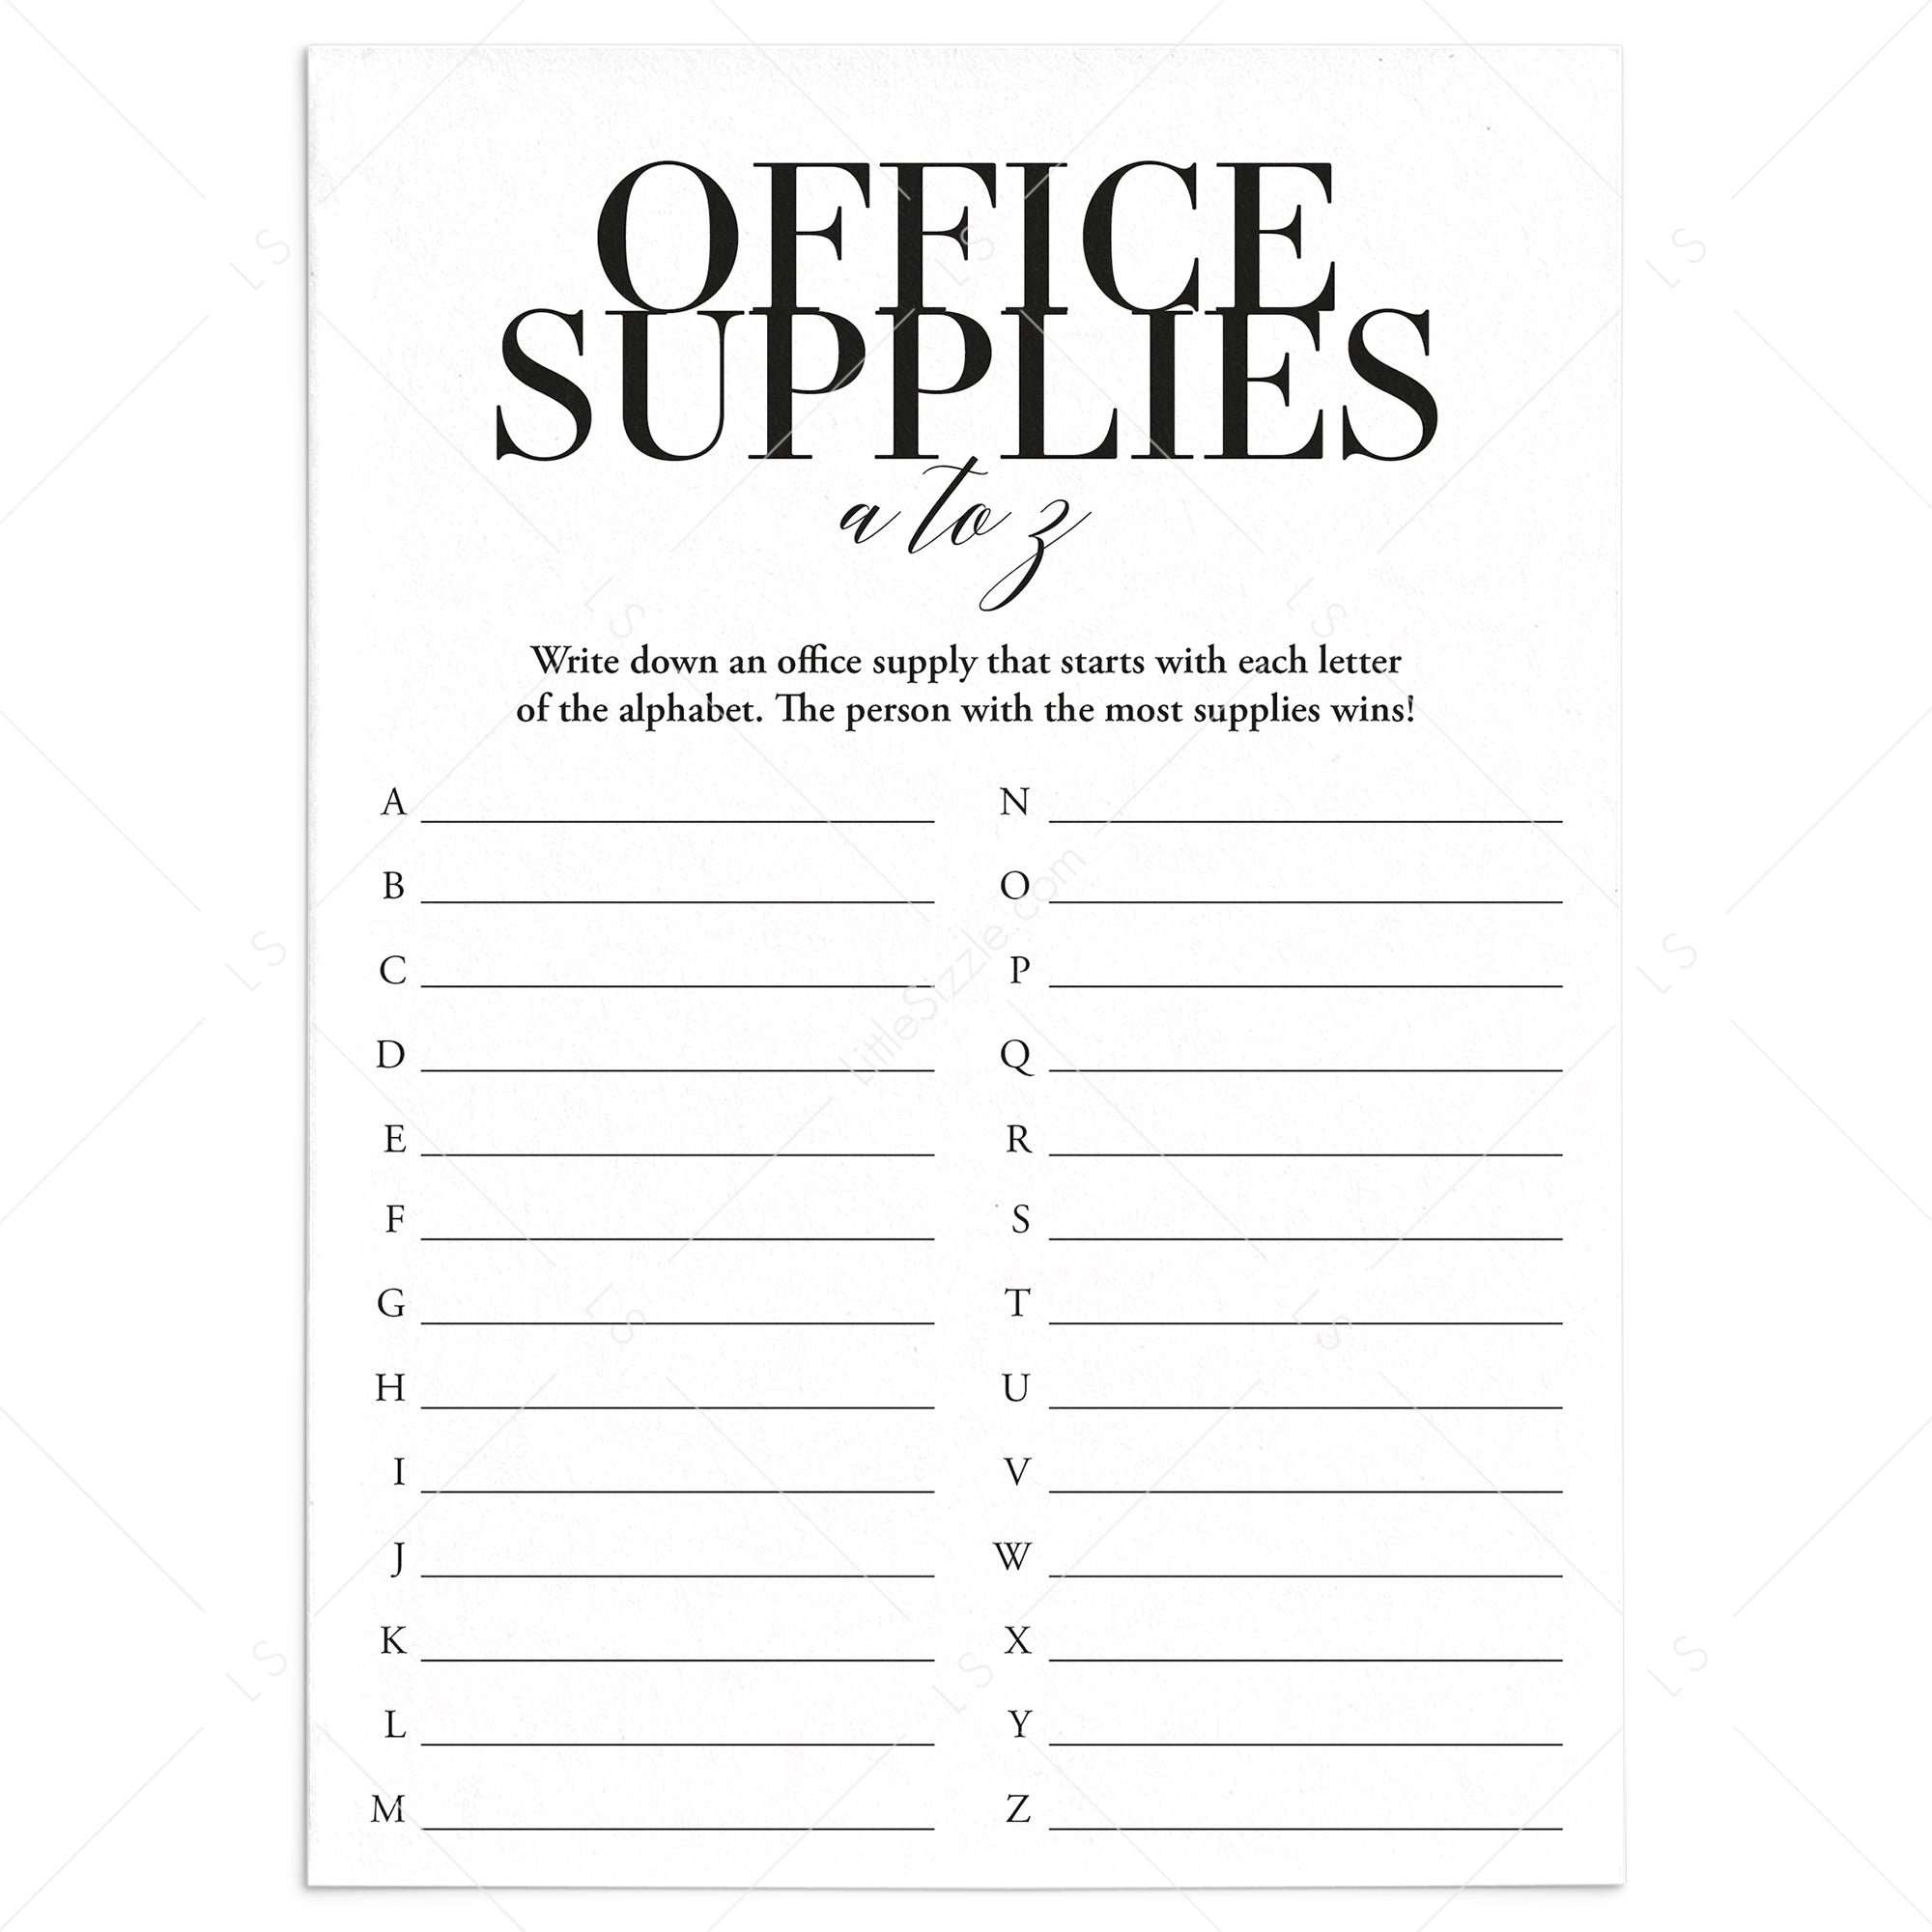 Free office supplies